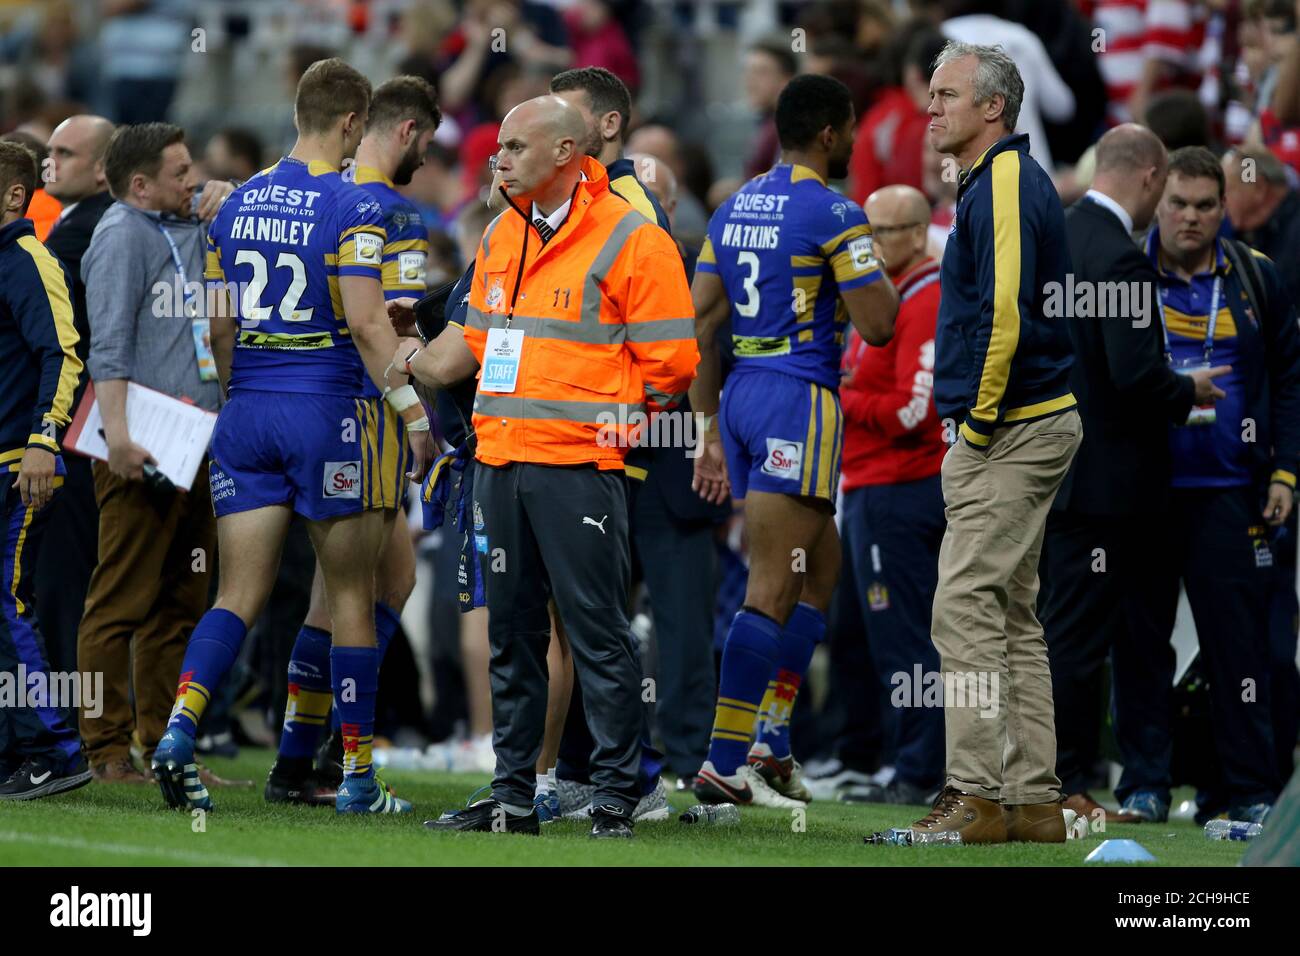 Leeds Rhinos head coach Brian McDermott (right) looks on after the Dacia Magic Weekend match at St James' Park, Newcastle. PRESS ASSOCIATION Photo. Picture date: Saturday May 21, 2016. See PA story RugbyL Weekend. Photo credit should read: Richard Sellers/PA Wire. RESTRICTIONS: Editorial use only. No commercial use. No false commercial association. No video emulation. No manipulation of images. Stock Photo